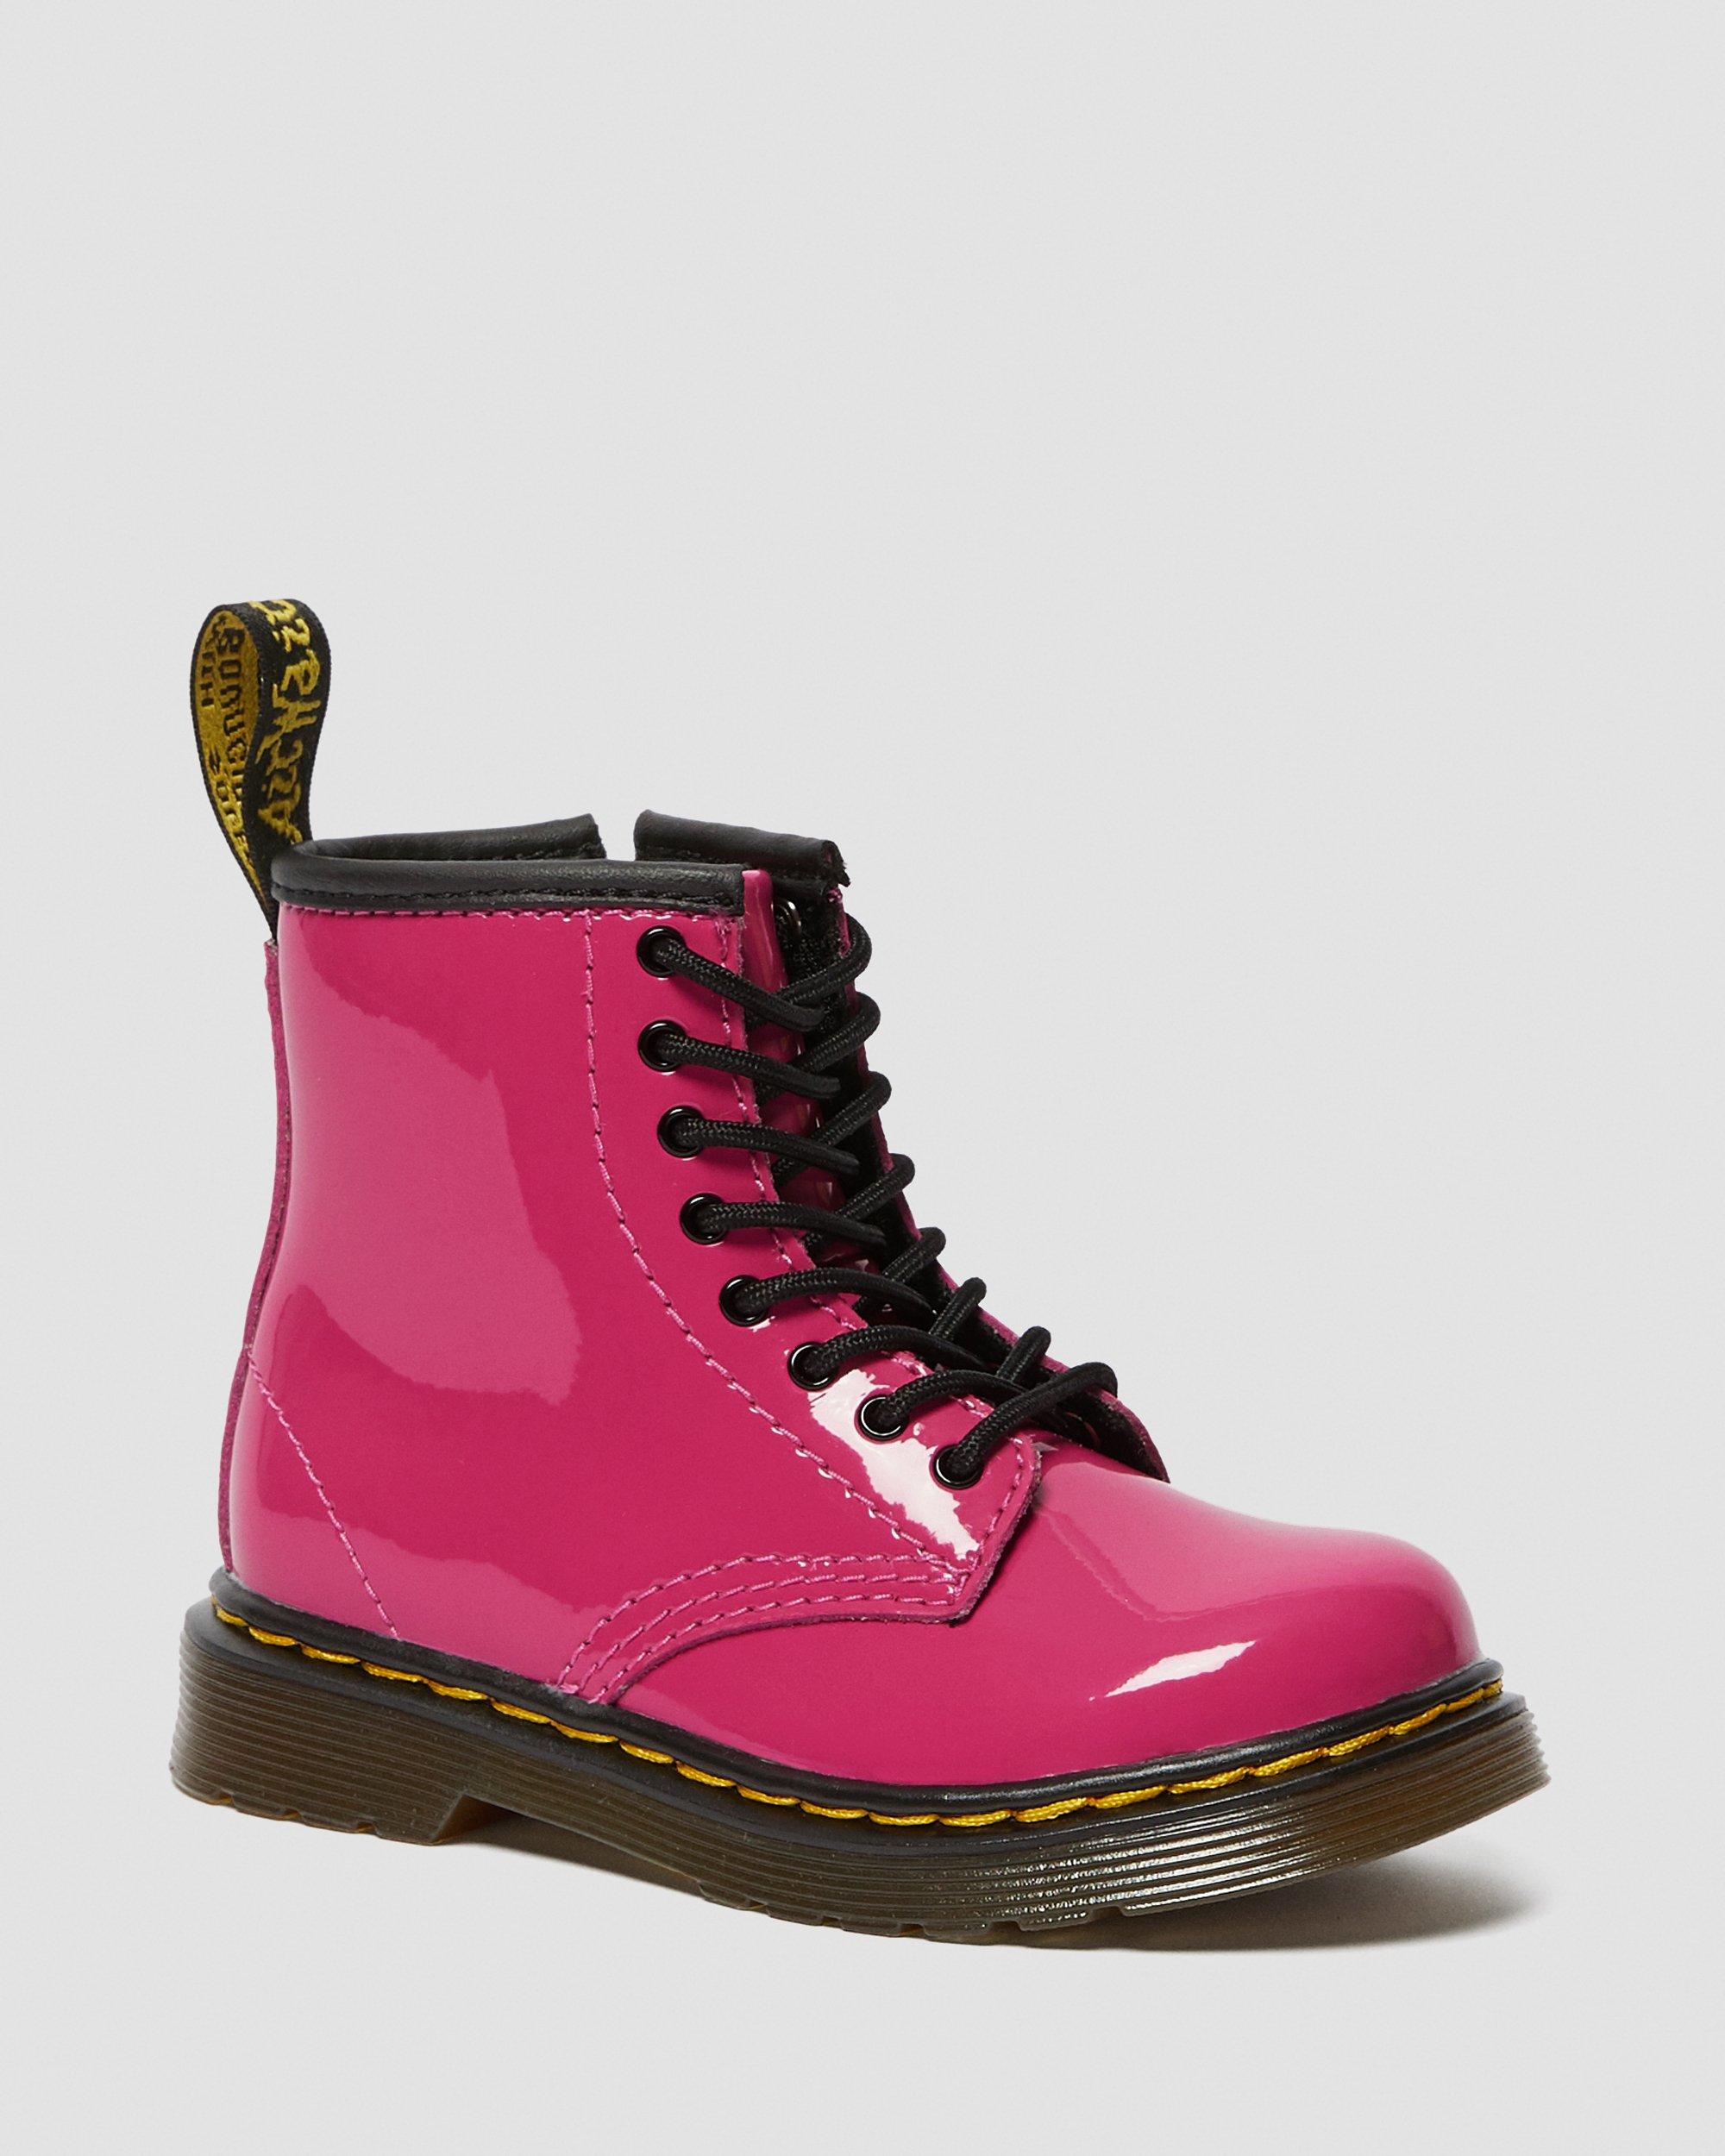 Toddler 1460 Patent Leather Lace Up Boots in Hot Pink